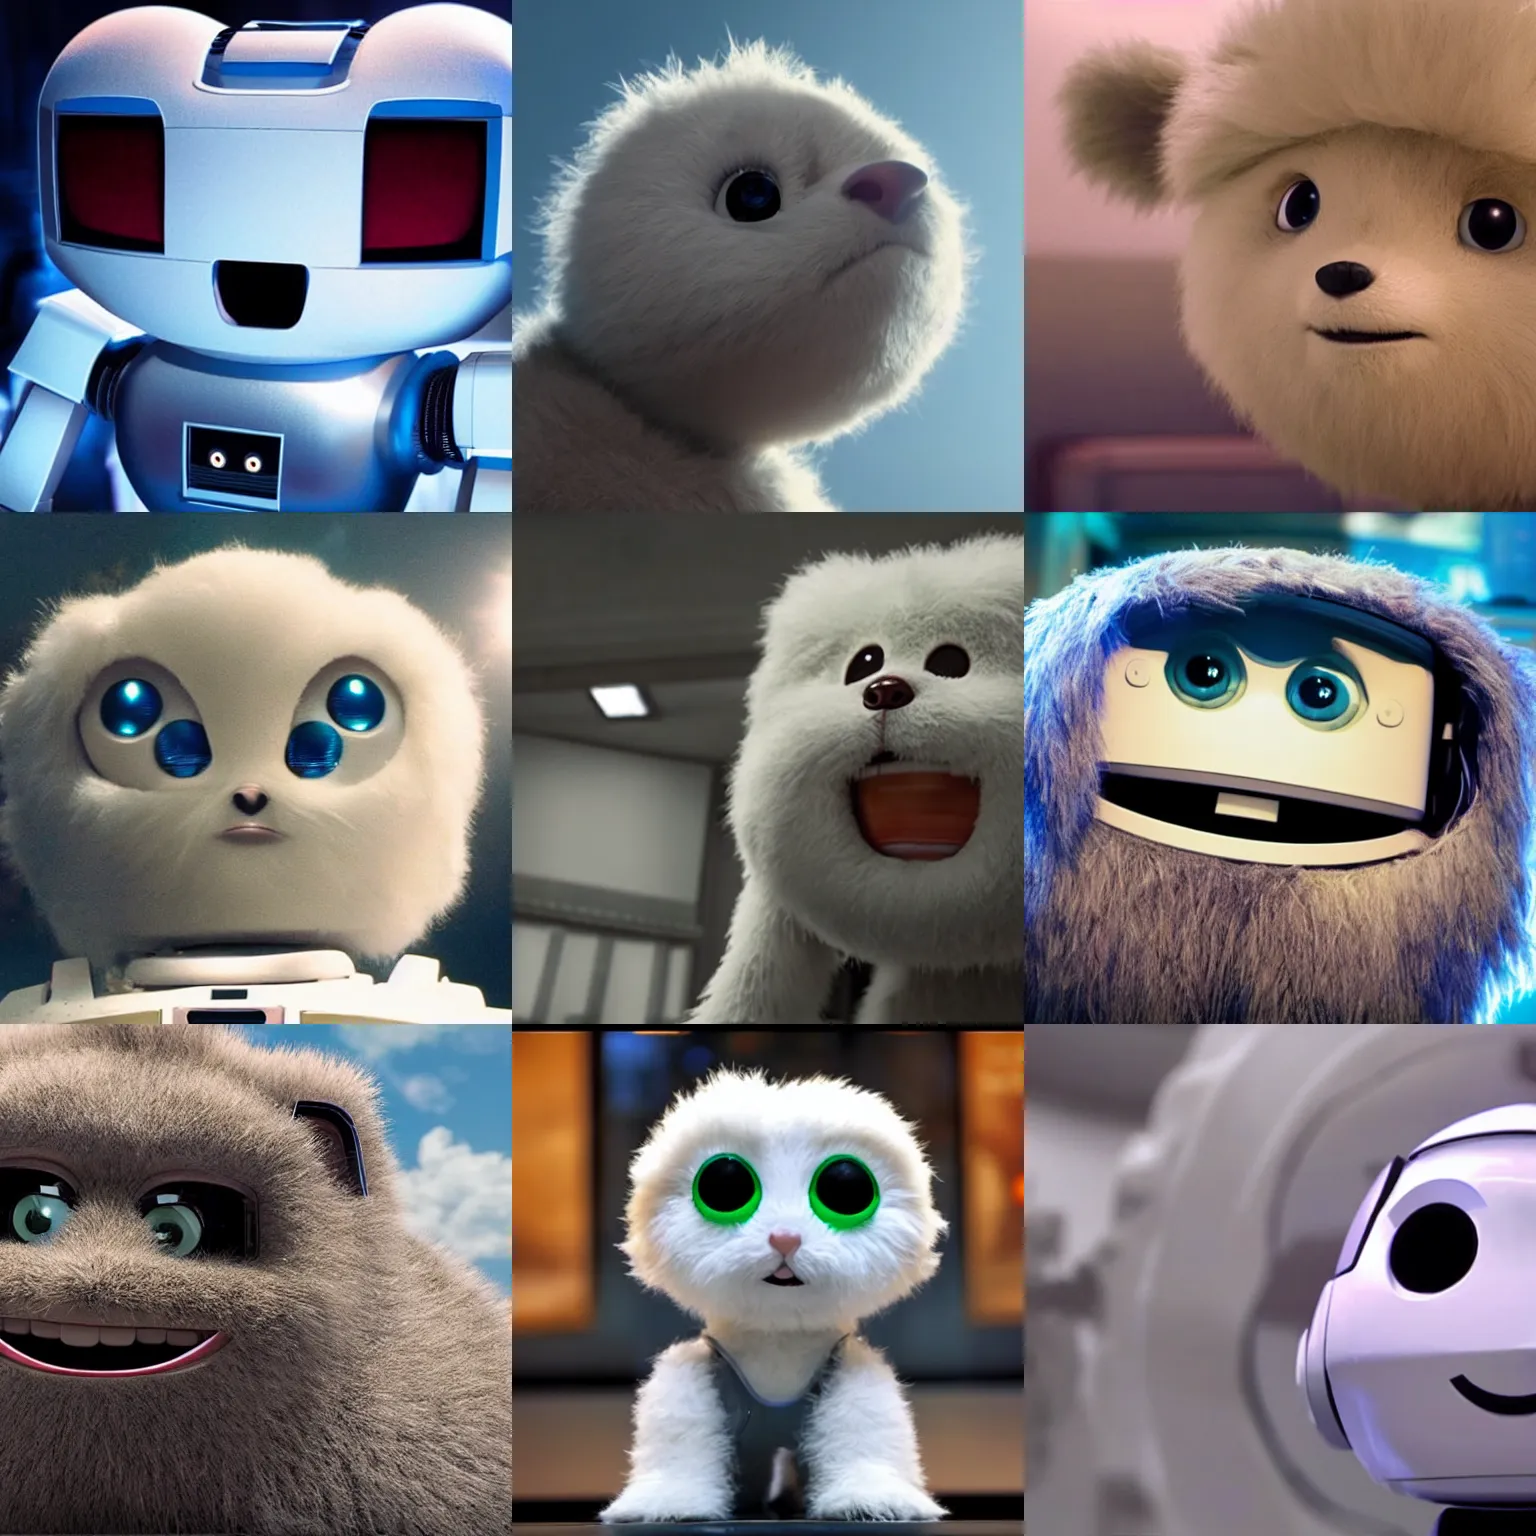 Prompt: < movie - still type = 3 d attention - grabbing > adorable fluffy robot looks up hopefully and curiously < / movie - still >